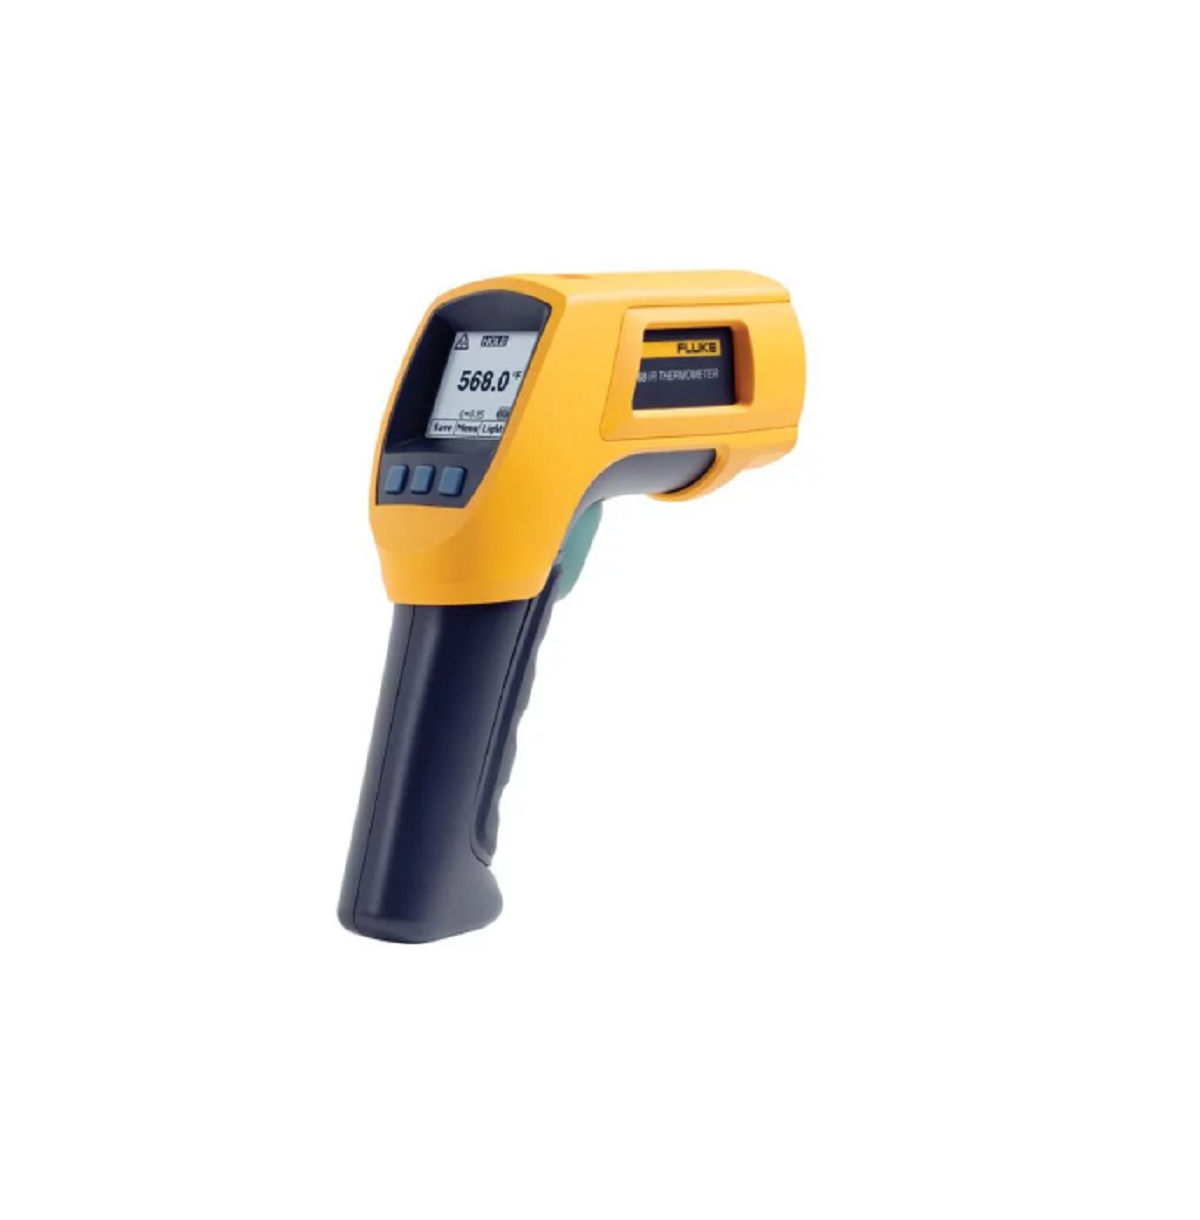 Fluke 568 Infrared And Contact Thermometer